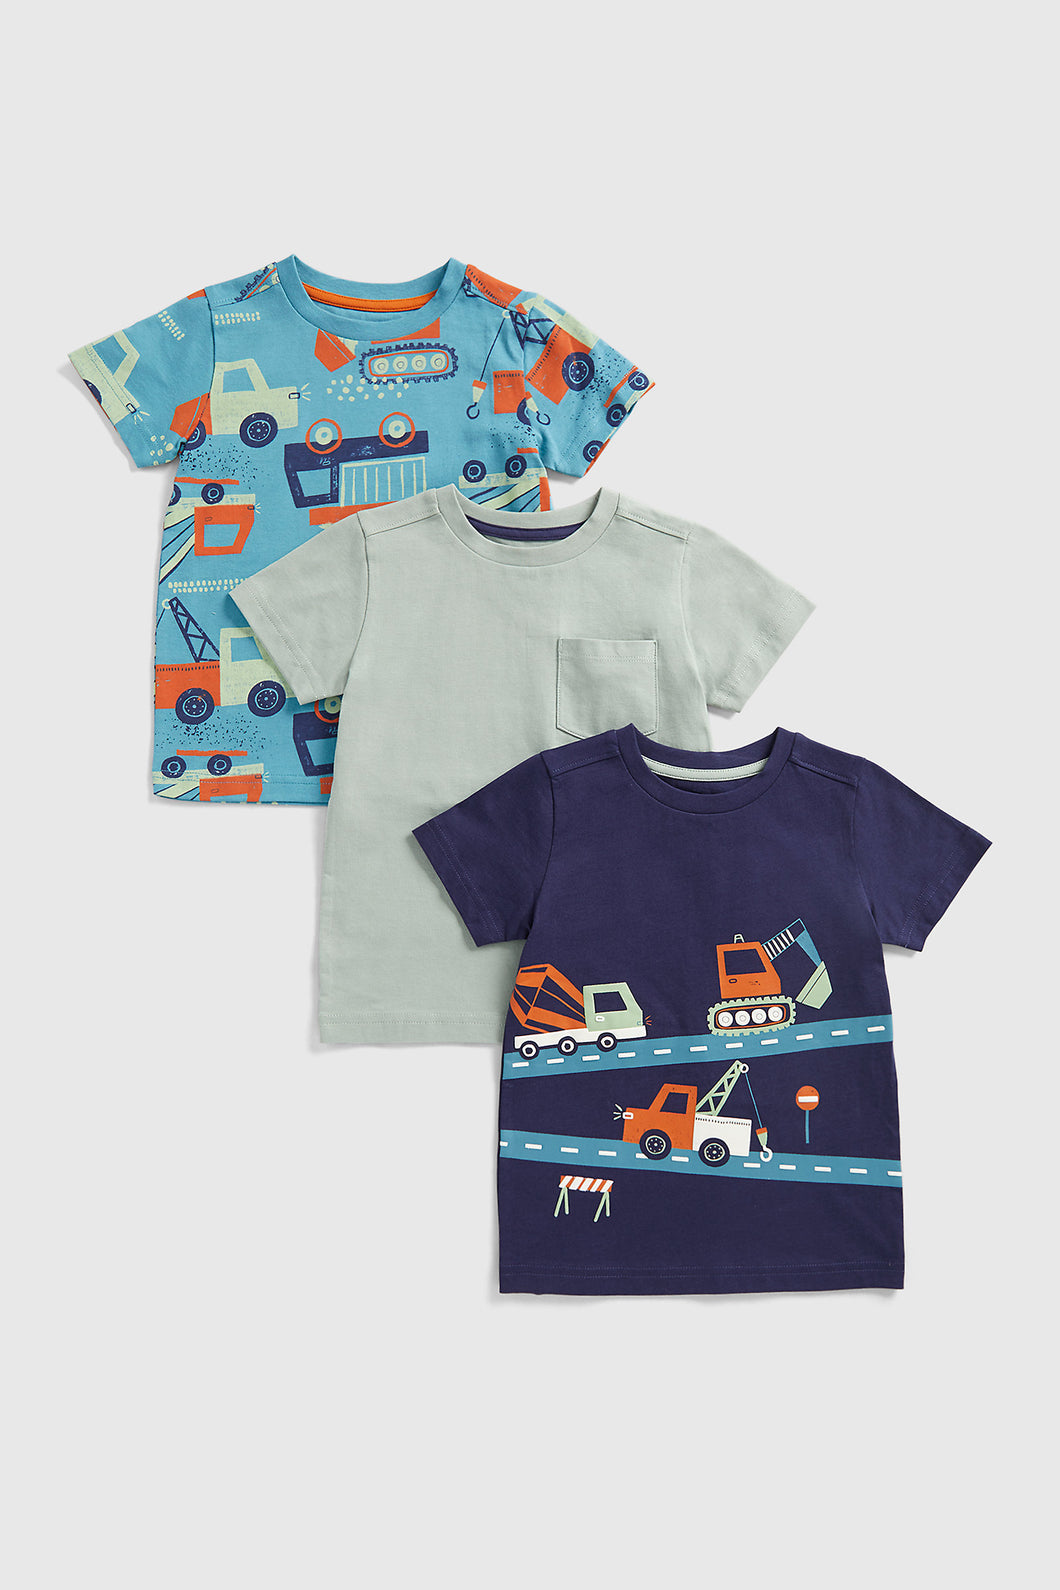 Mothercare Diggers T-Shirts - 3 Pack